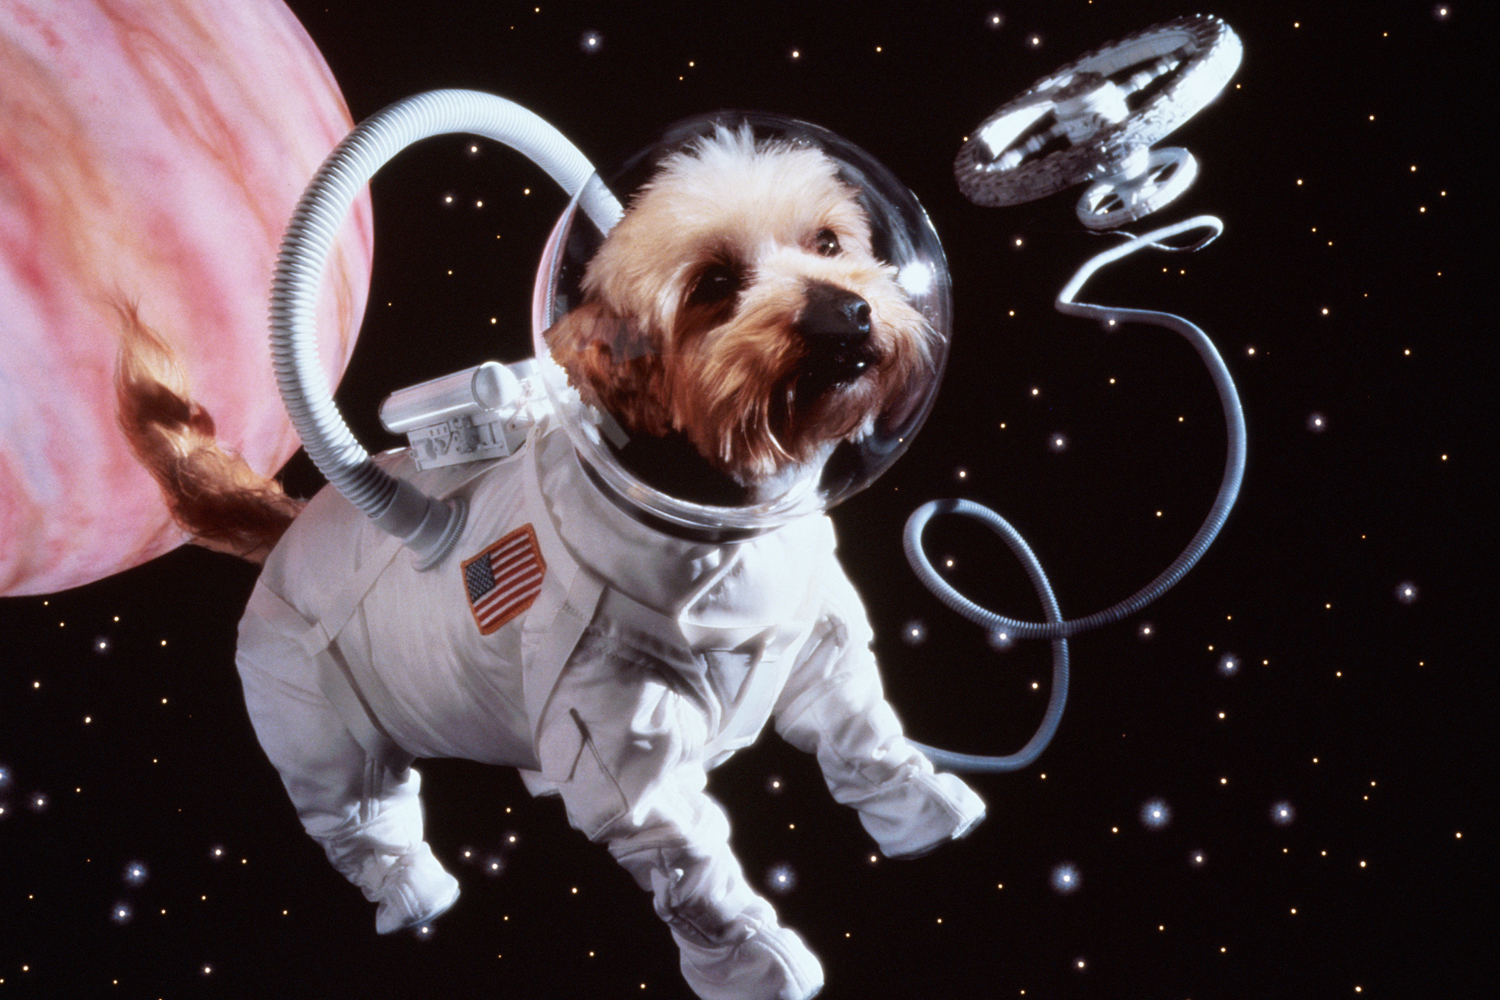 Unlike this stock photo, your pet's cremated remains would be sent to space in capsules. (Getty Images)